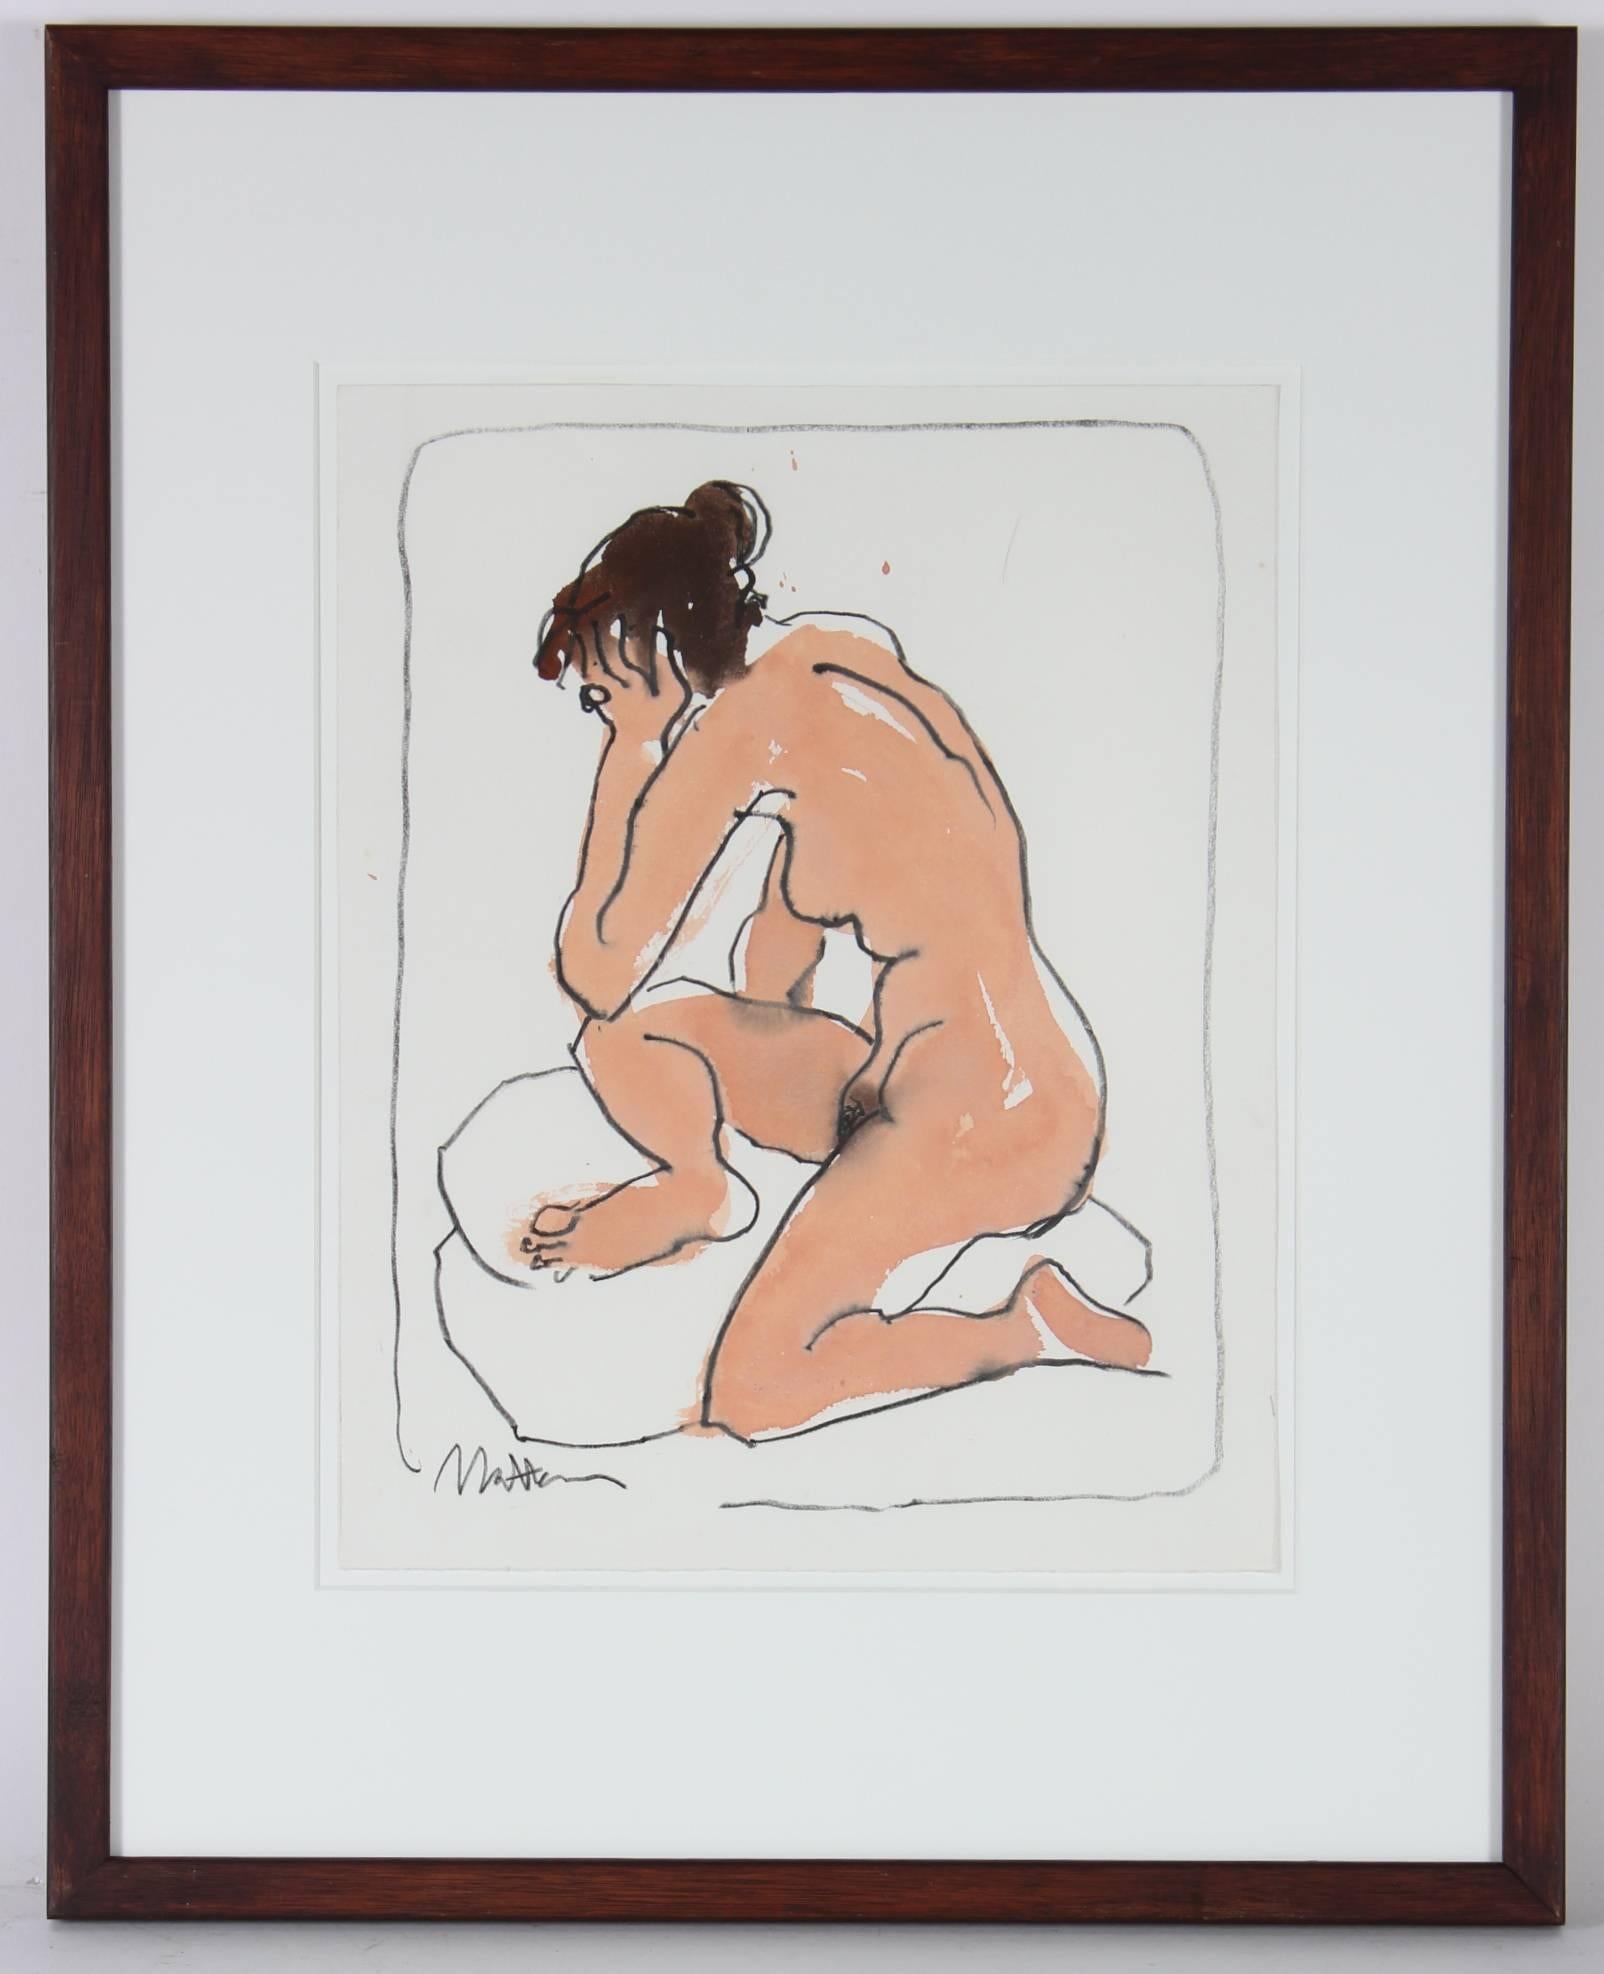 Modernist Nude Figure in Charcoal and Ink, 20th Century - Art by Rip Matteson